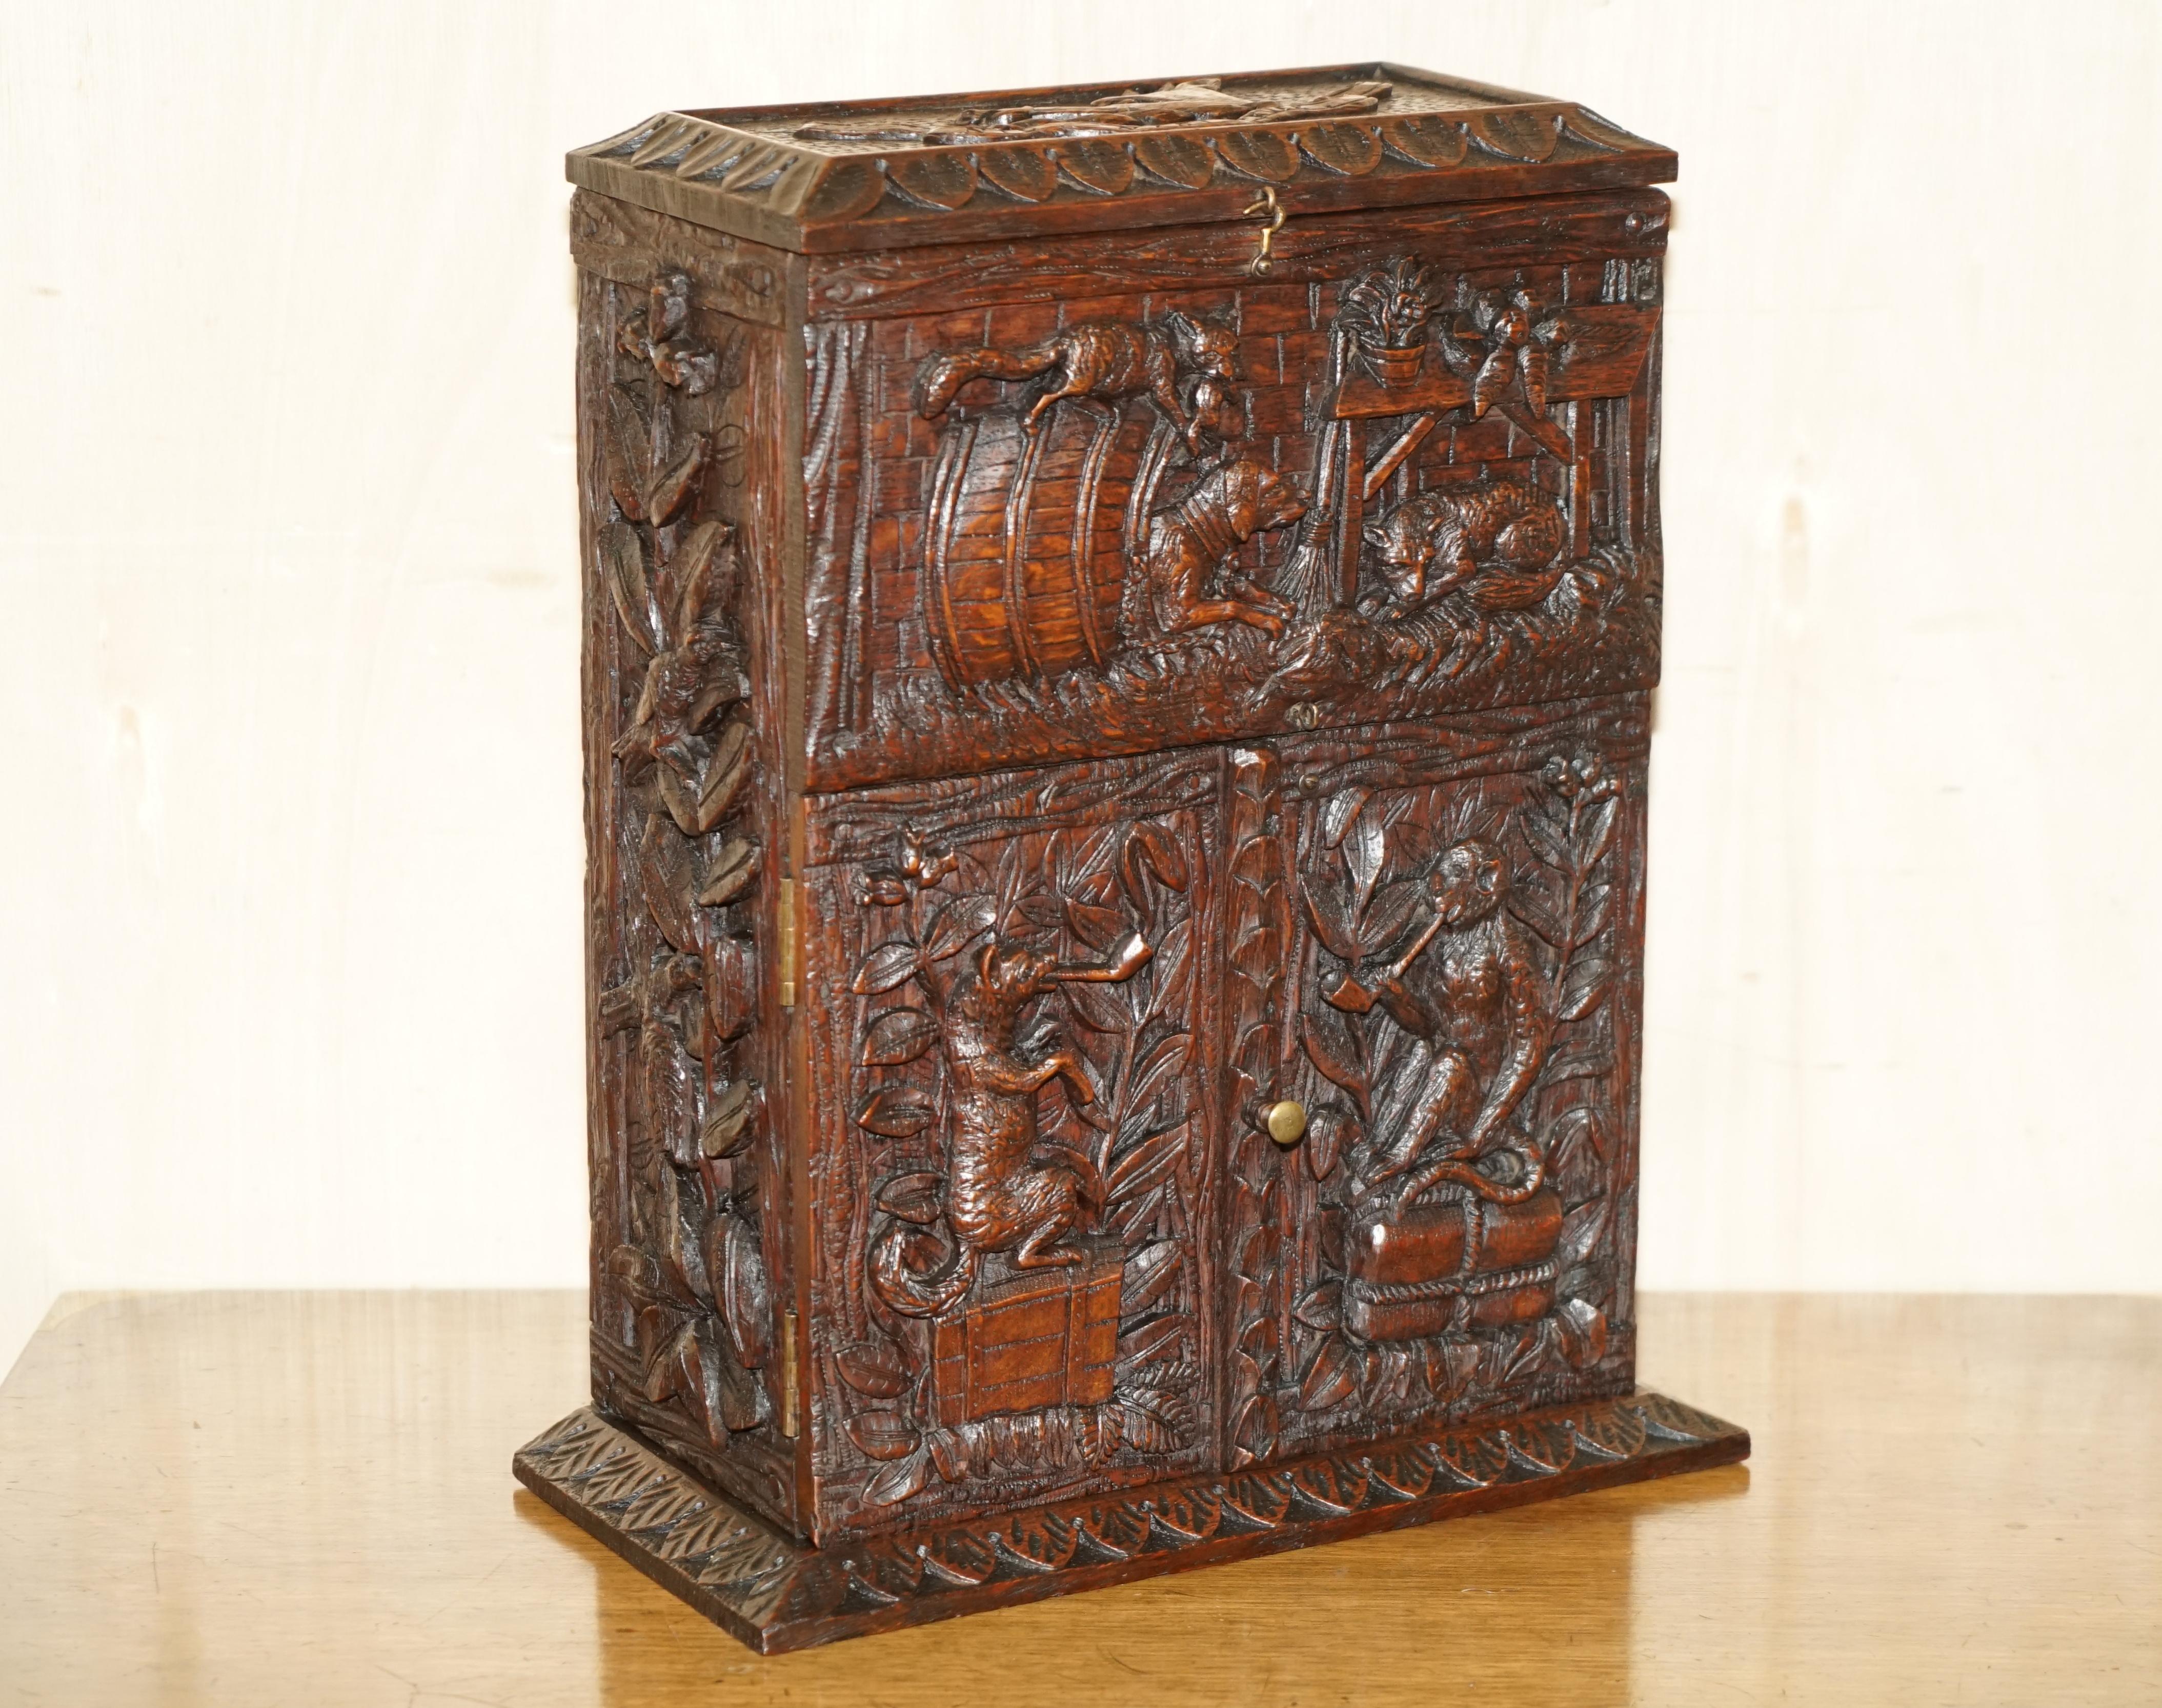 Royal House Antiques

Royal House Antiques is delighted to offer for sale this stunning, hand carved Black Forest wood, smoking pipe cabinet or rack with inscribed top reading 